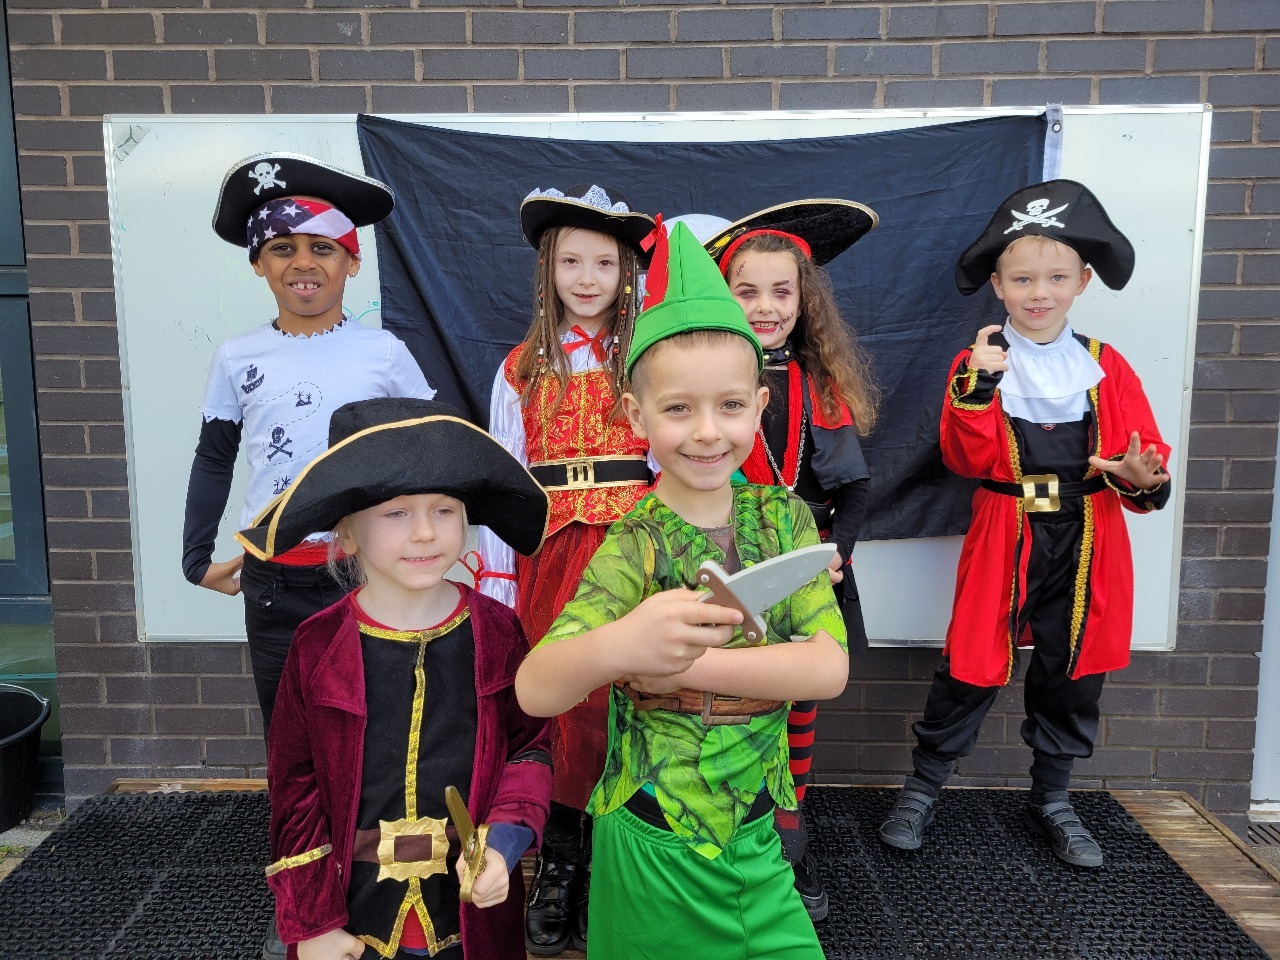  Pirates and Pixies fundraising day at Gwenfro CP School.